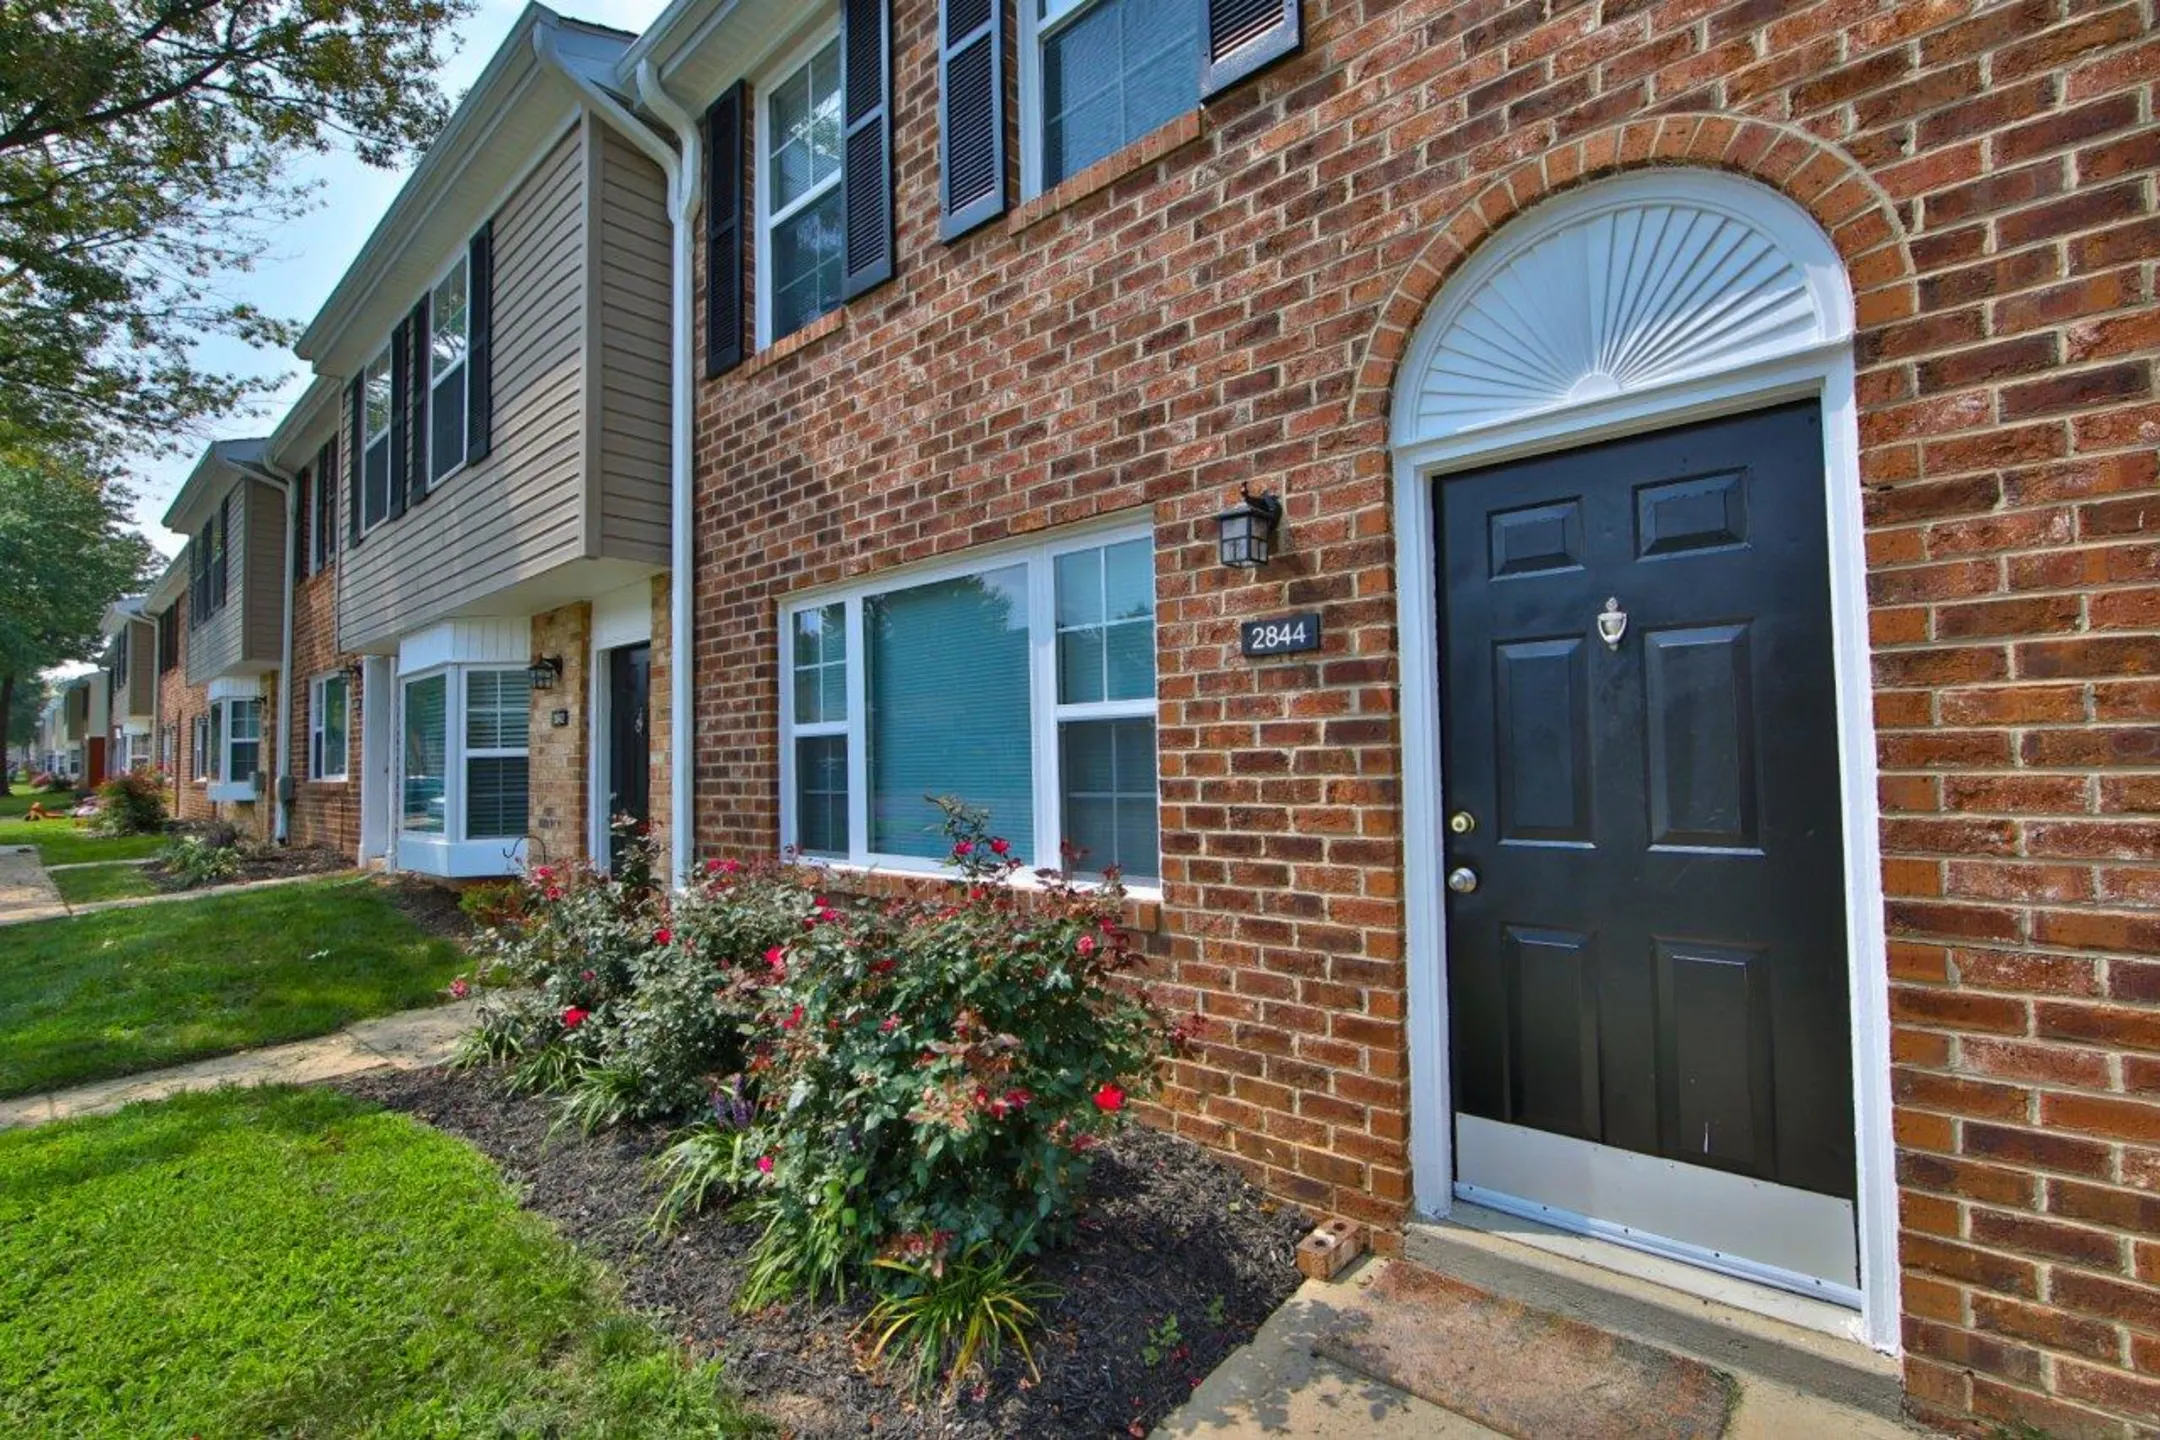 Building - The Townhomes at Diamond Ridge - Windsor Mill, MD